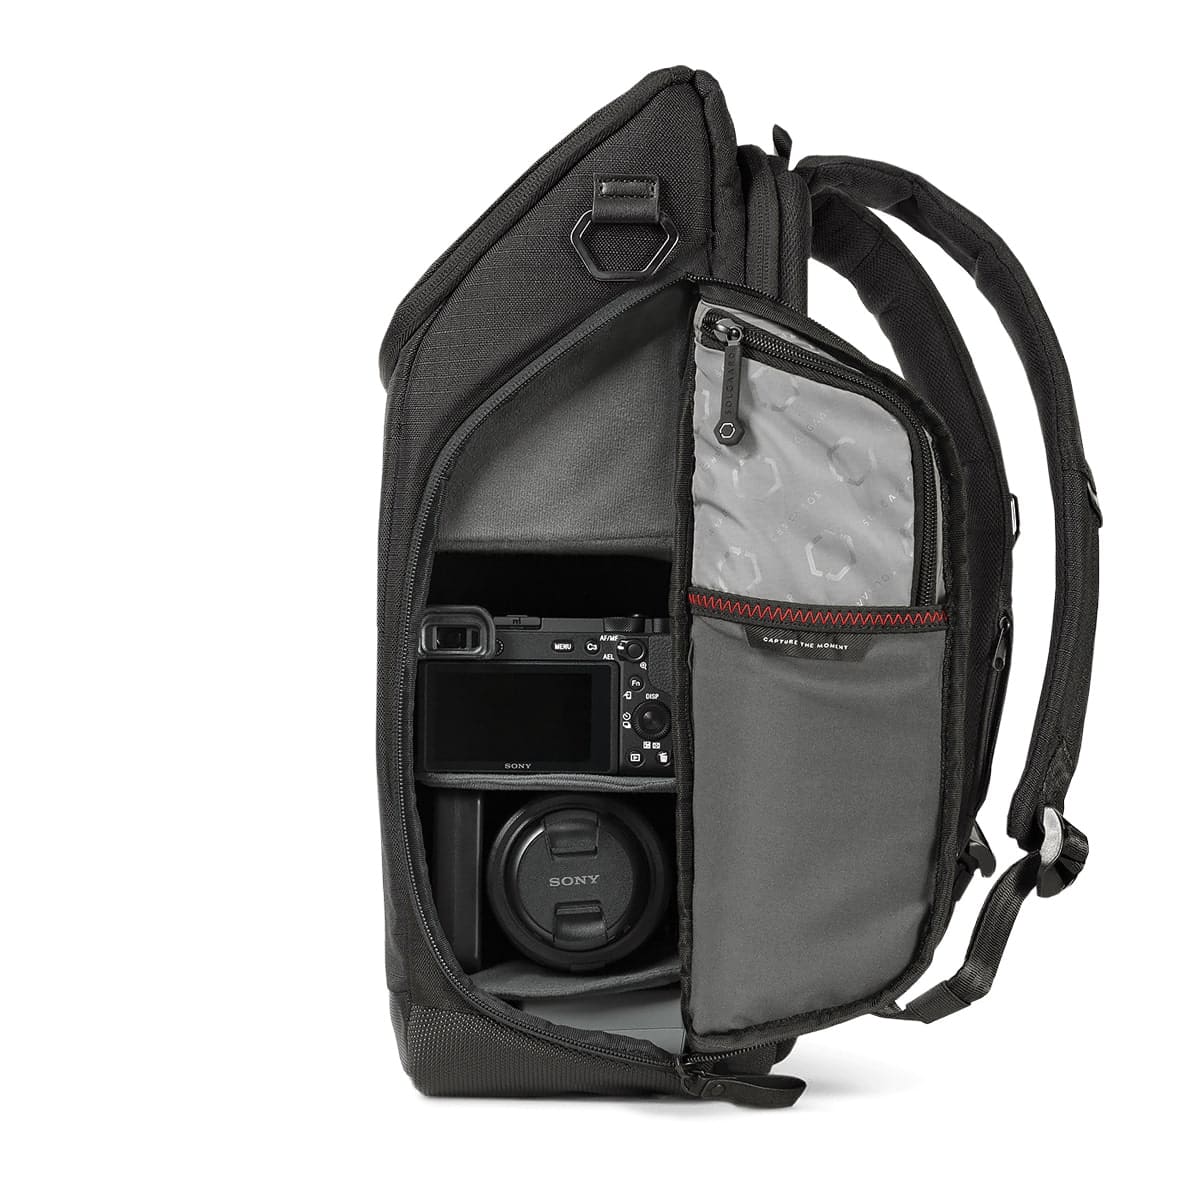 Light and compact camera backpack